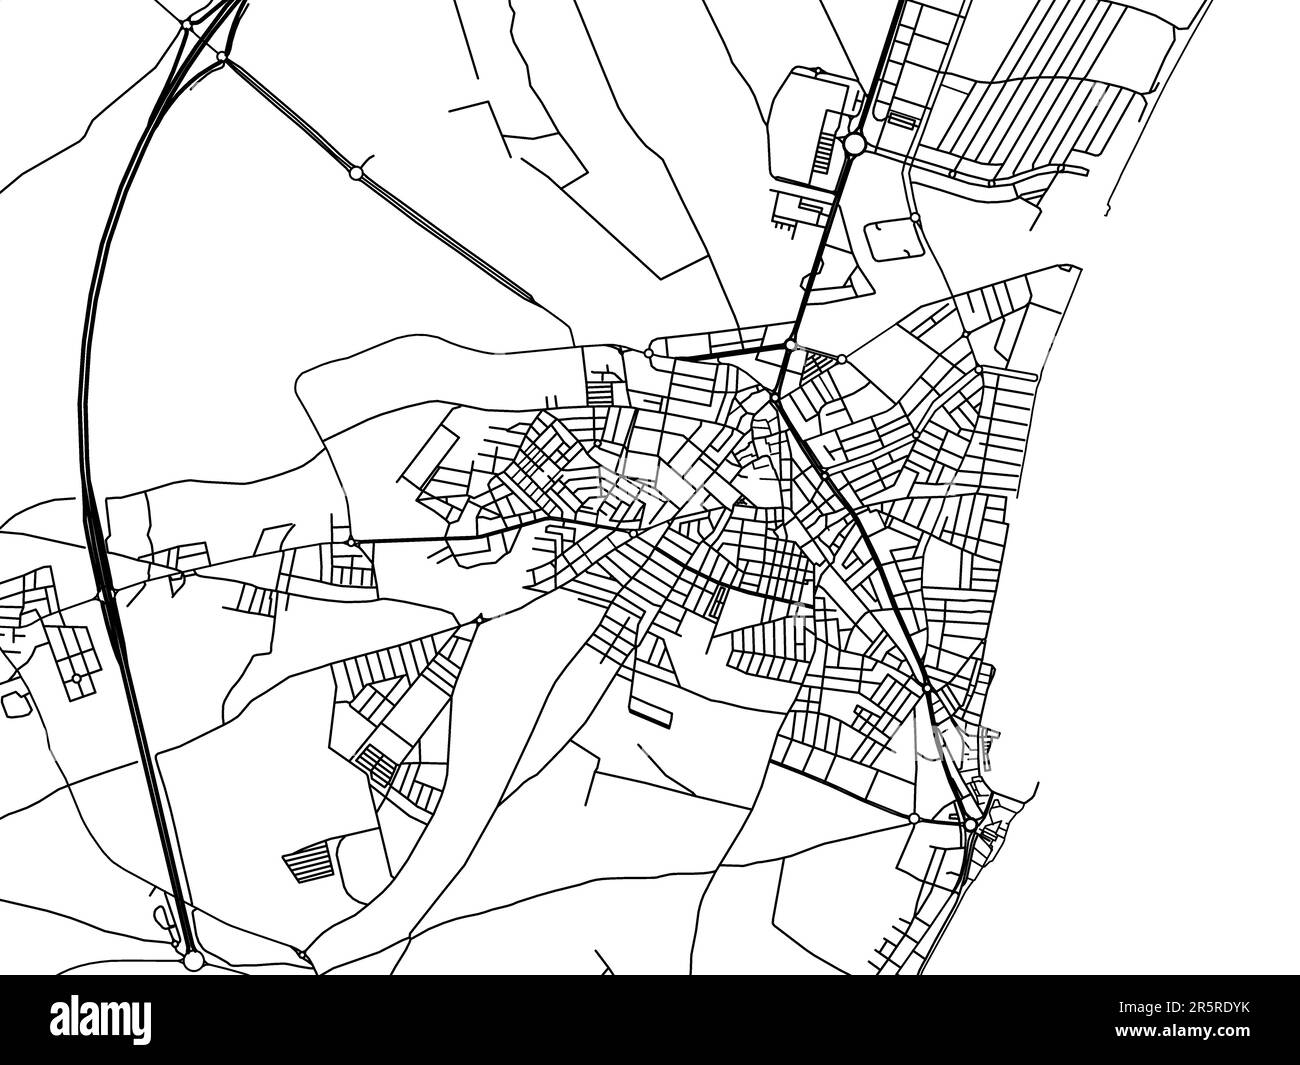 Vector road map of the city of  Roquetas de Mar in Spain on a white background. Stock Photo